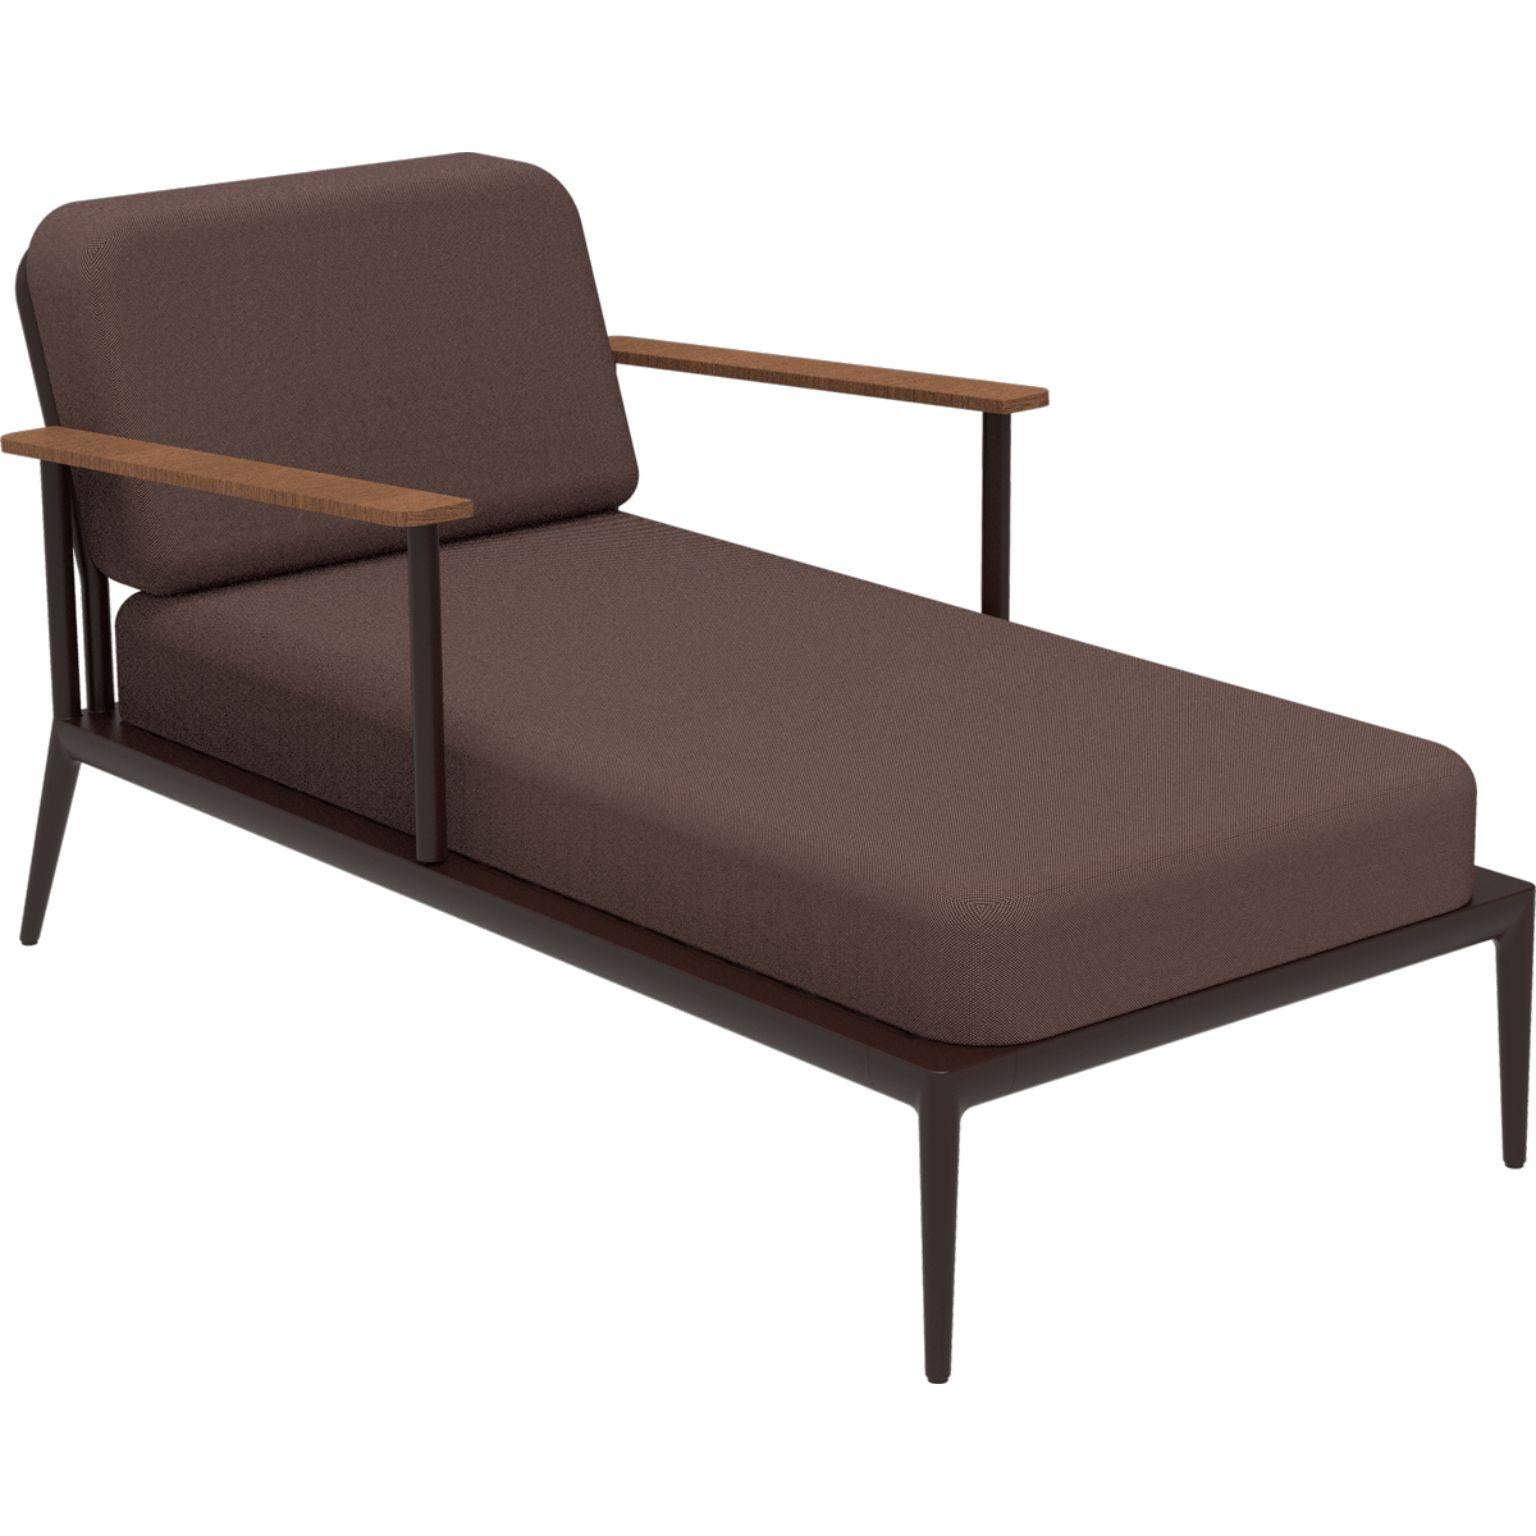 Nature Chocolate Divan by MOWEE
Dimensions: D155 x W83 x H81 cm (seat height 42 cm).
Material: Aluminum, upholstery and Iroko wood.
Weight: 30 kg.
Also available in different colors and finishes. Please contact us.

An unmistakable collection